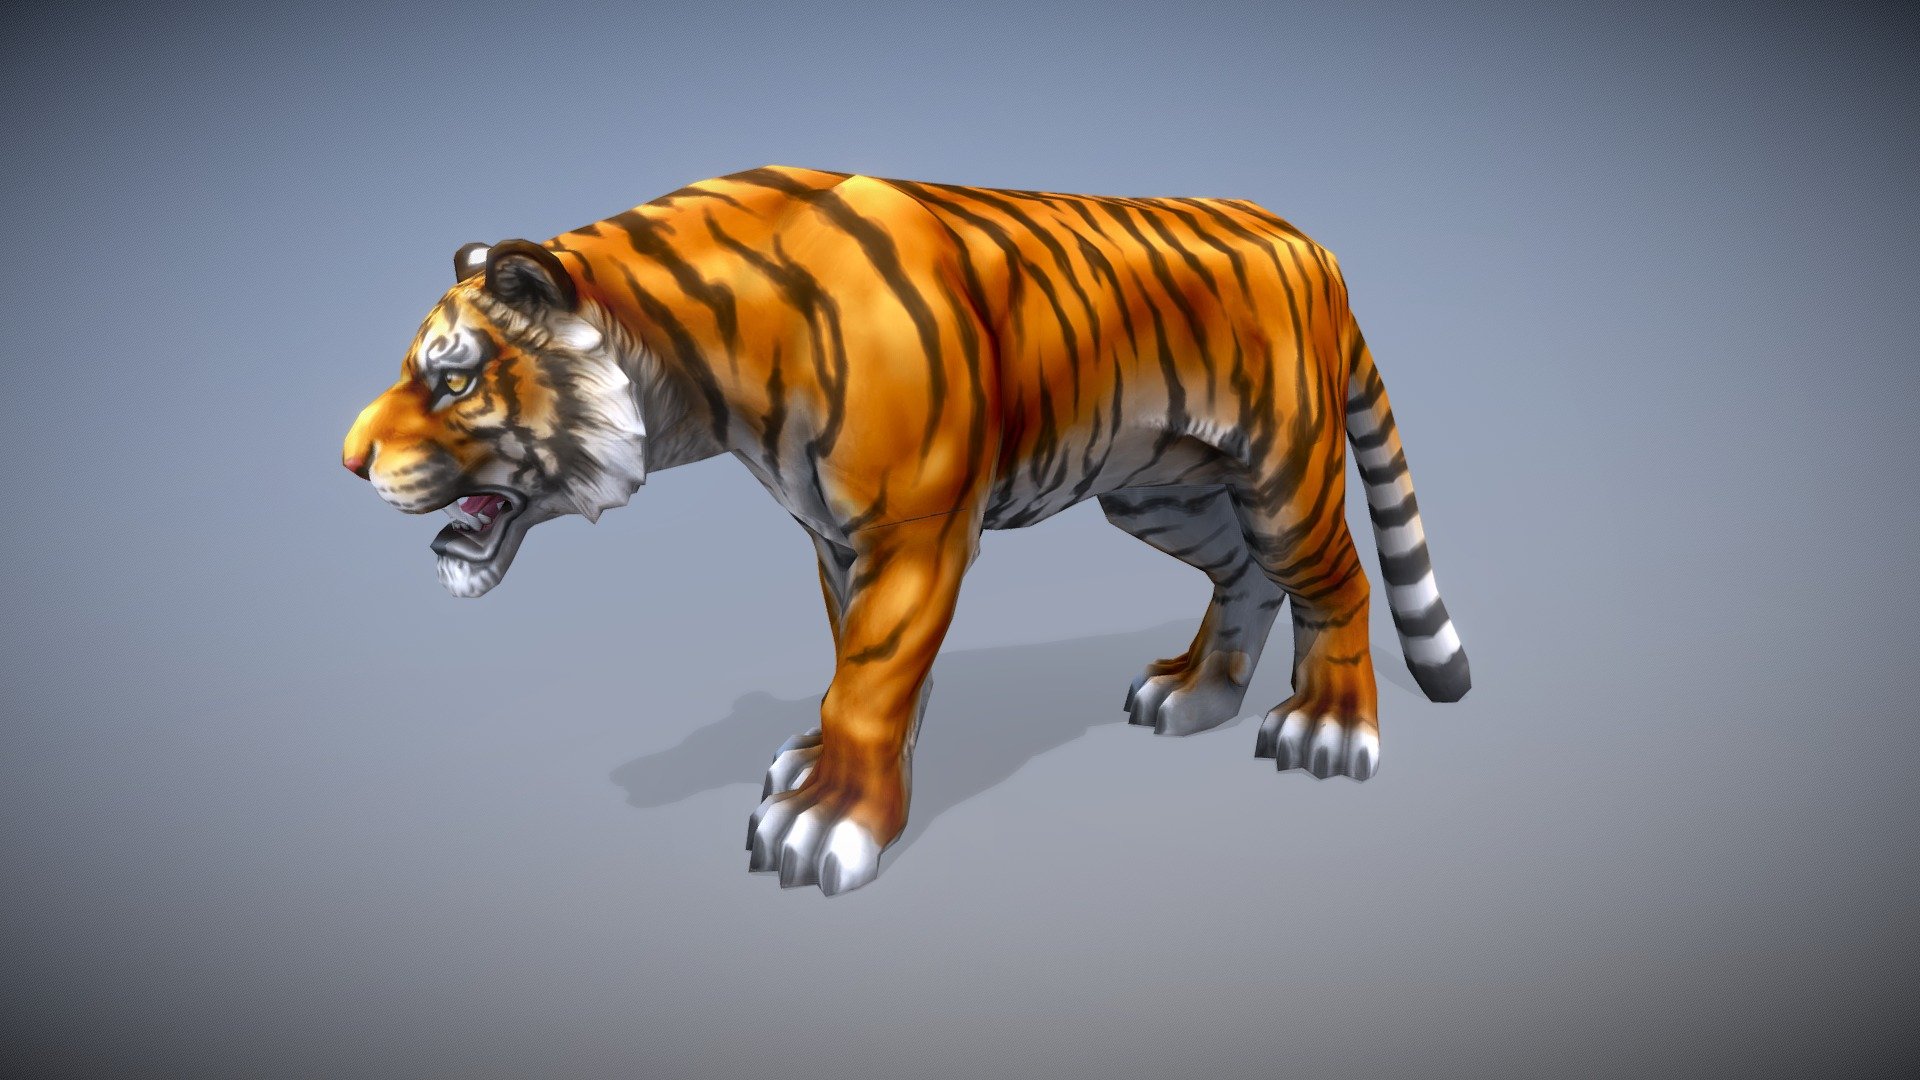 Tiger
Low-poly, hand-painted tiger for a mobile game called Celtic Heroes 3d model